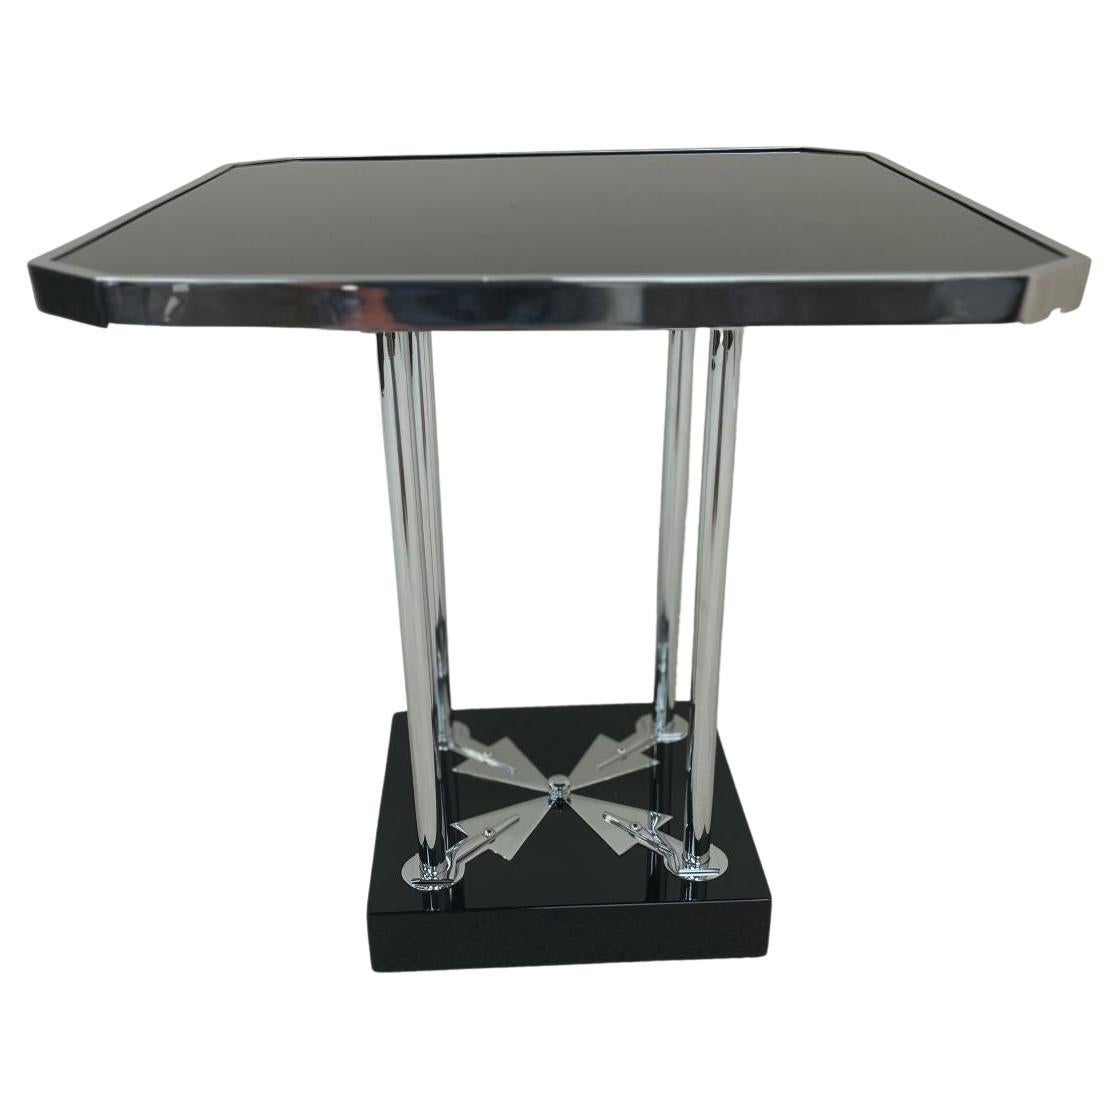 One of a kind Bauhaus Art Deco side table. Unique design with a black glass top, four chrome supports on a black lacquer base with chrome arrow accents. Table has been professionally restored. Dimensions 22 inches square by 22.5 inches high